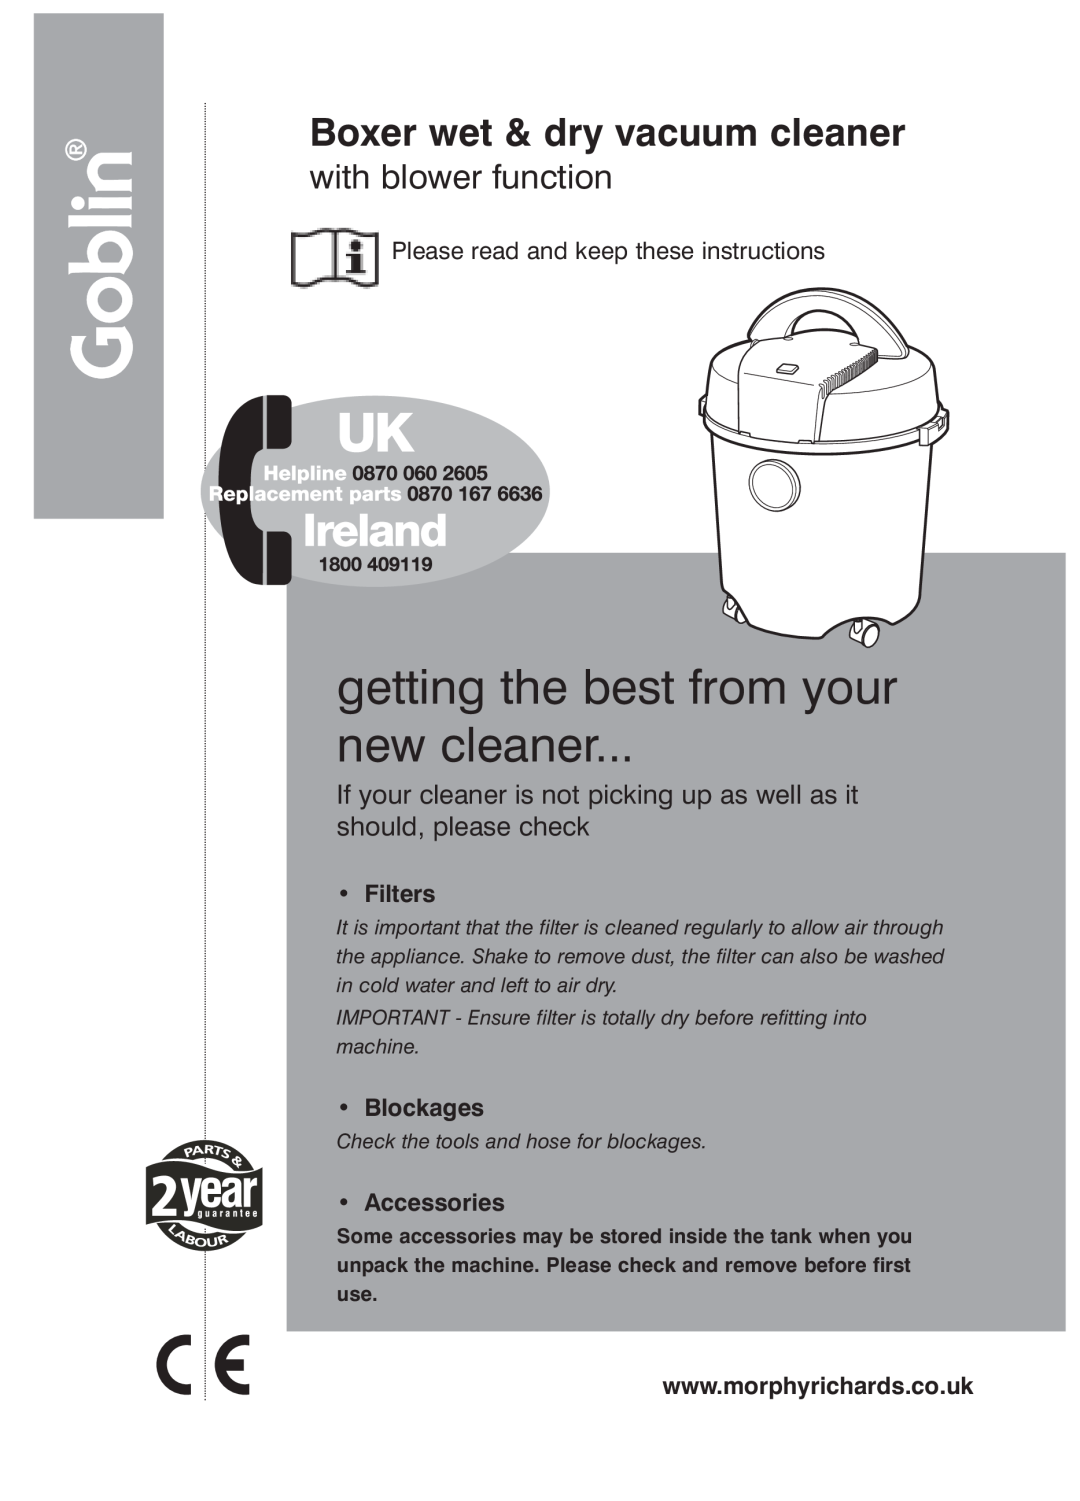 Morphy Richards Boxer wet & dry vacuum cleaner manual getting the best from your new cleaner, with blower function 